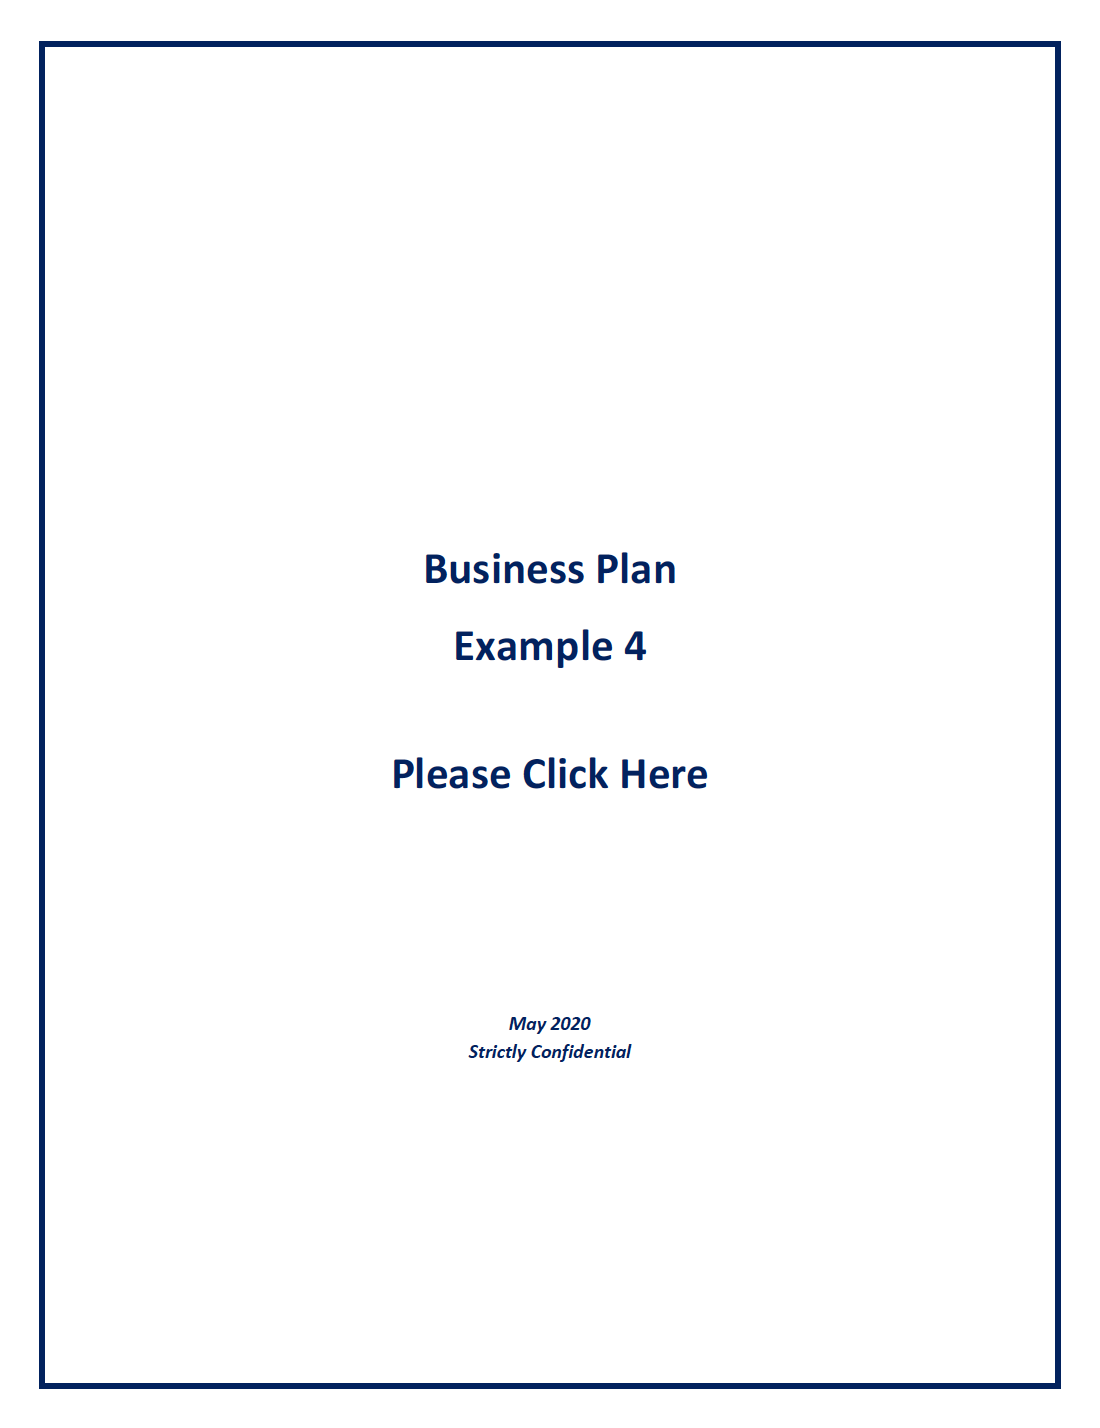 simple business plan for bank loan